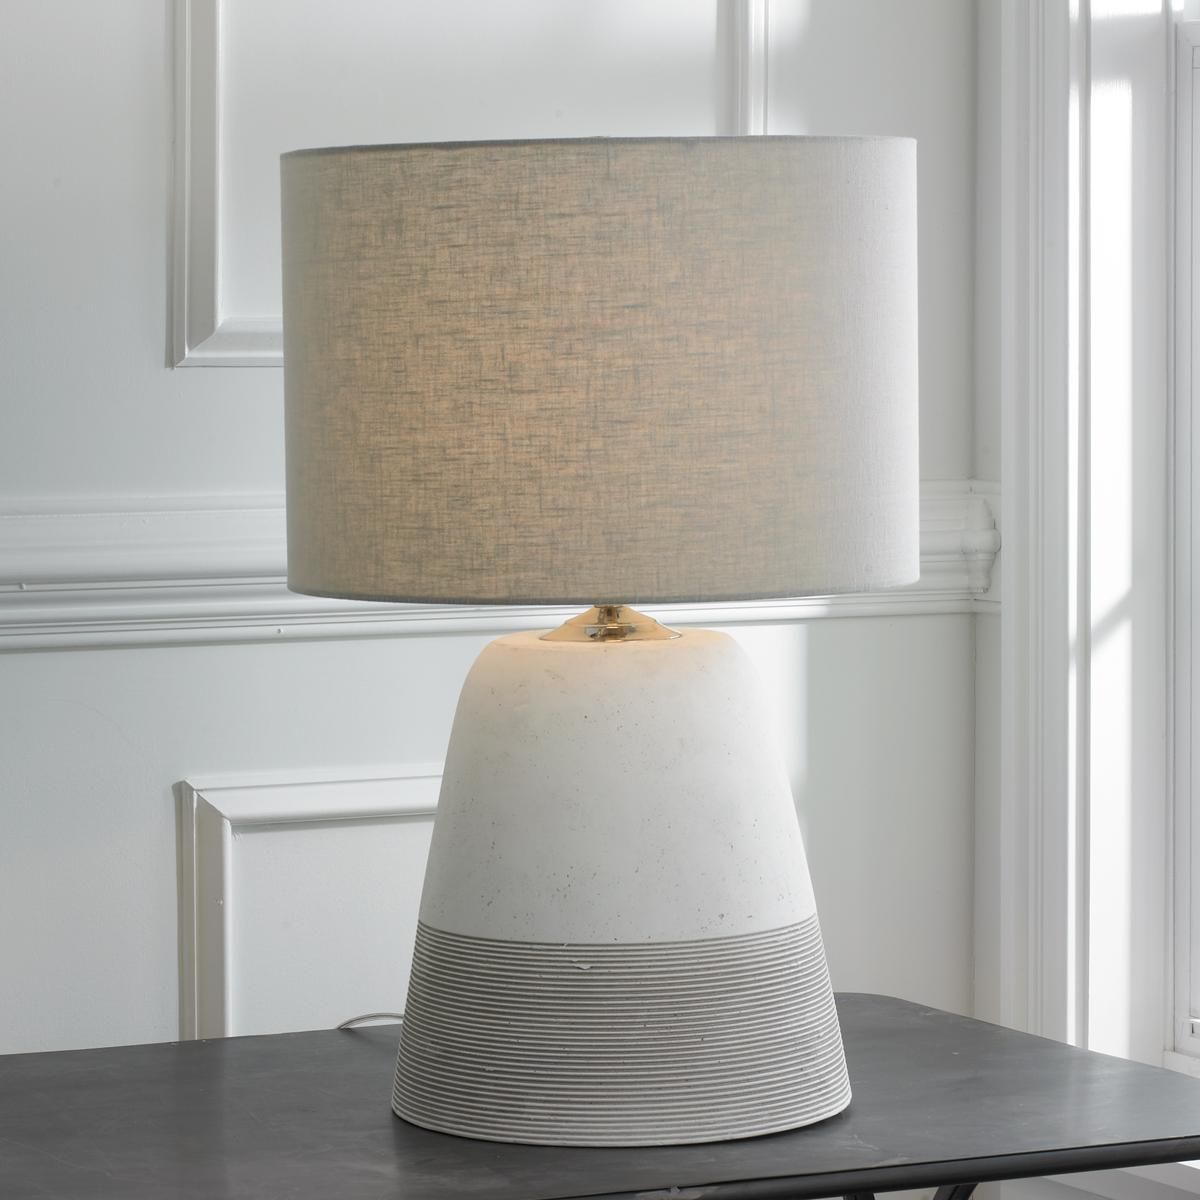 grooved concrete table lamp small modern mini accent lamps this stunning comes neutral light gray finish highlighted concentric ringed grooves wall mounted wine glass rack pier